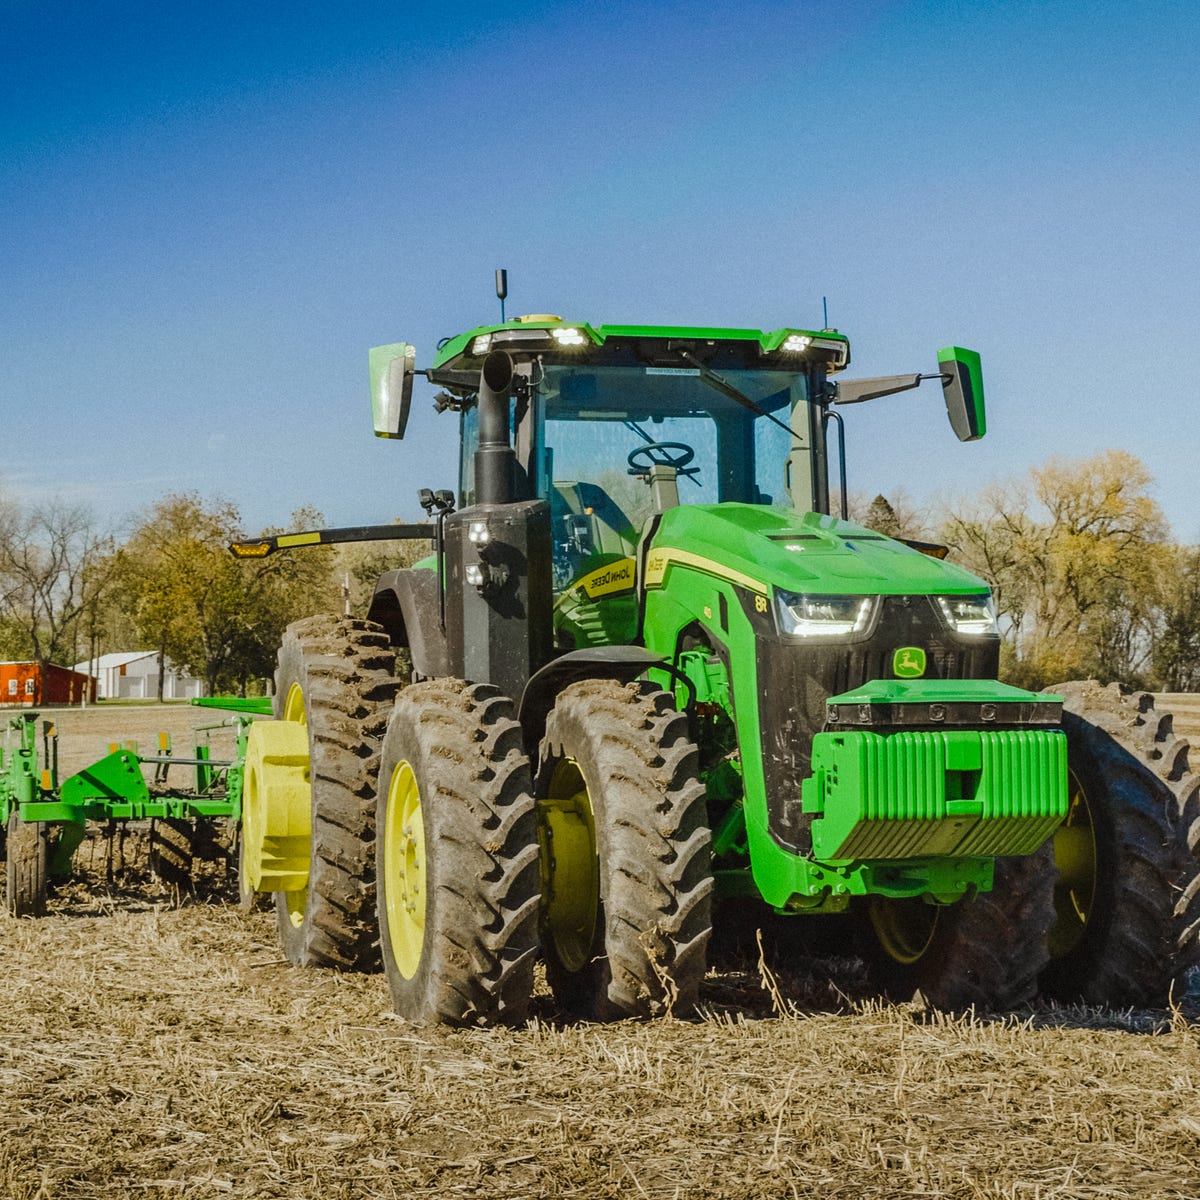 Vermomd Bijdrage passen John Deere breaks new ground with self-driving tractors you can control  from a phone - CNET